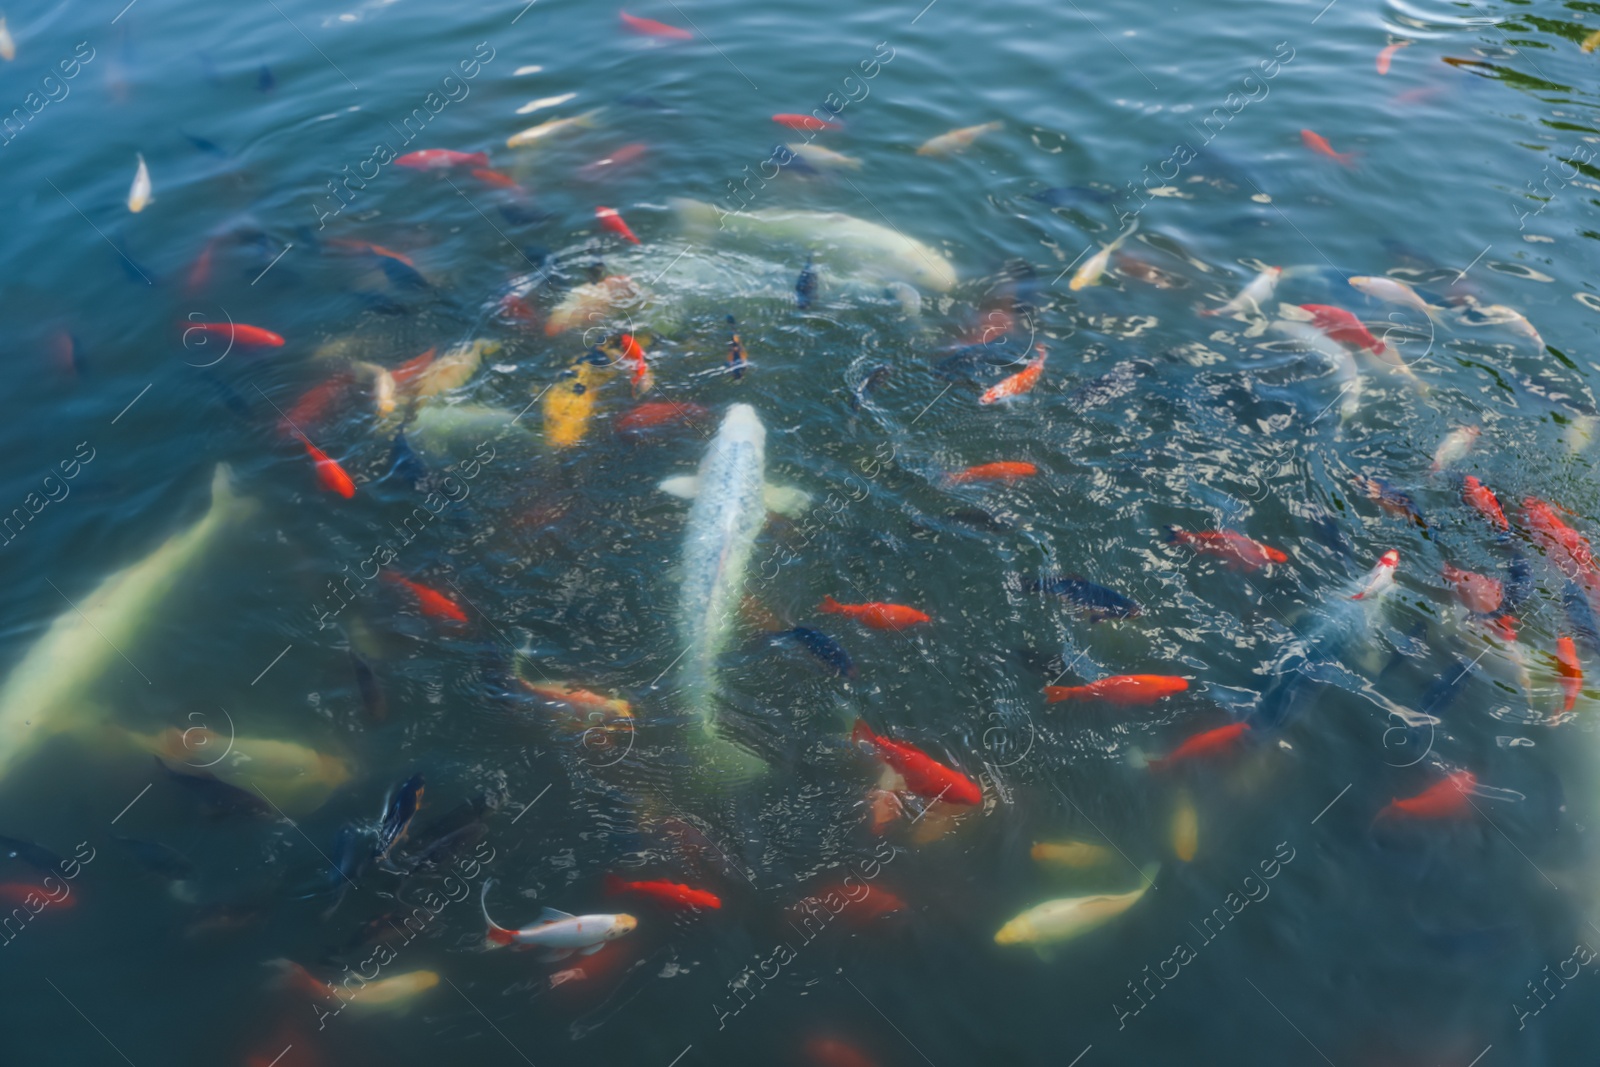 Photo of Koi carps and other fishes swimming in clear pond water